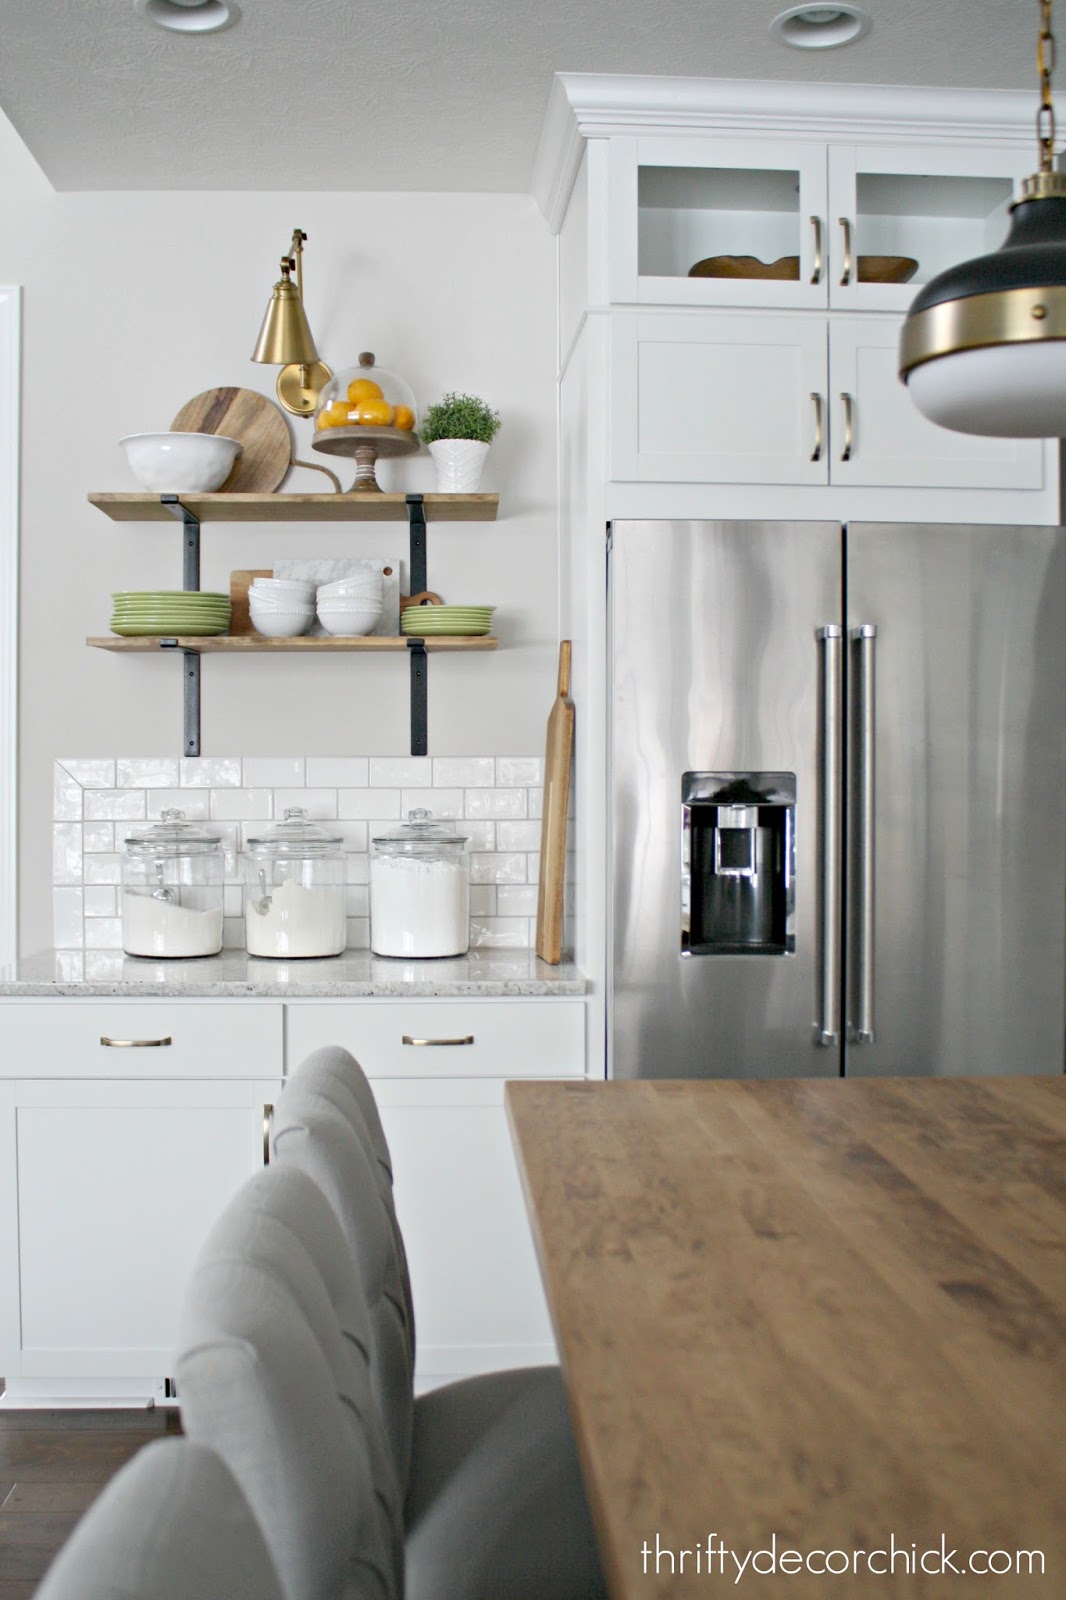 Hanging Shelves In The Kitchen From Thrifty Decor Chick